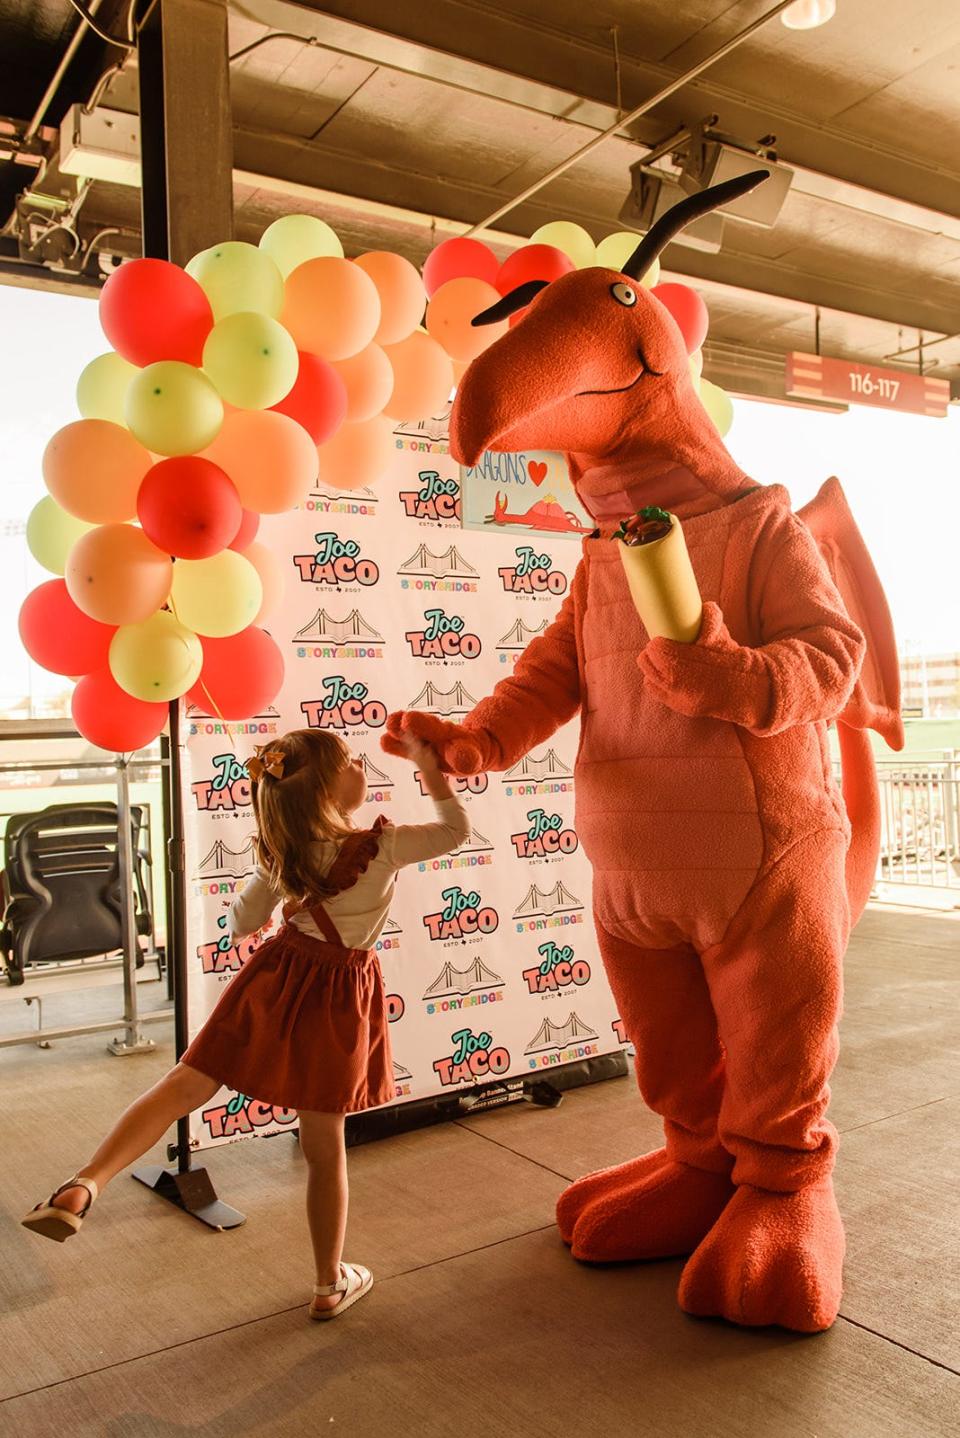 Meet the book characters you know and love at Storybridge Live, being held at Hodgetown Oct.14 from 10 a.m. to noon. Tickets are on sale now.